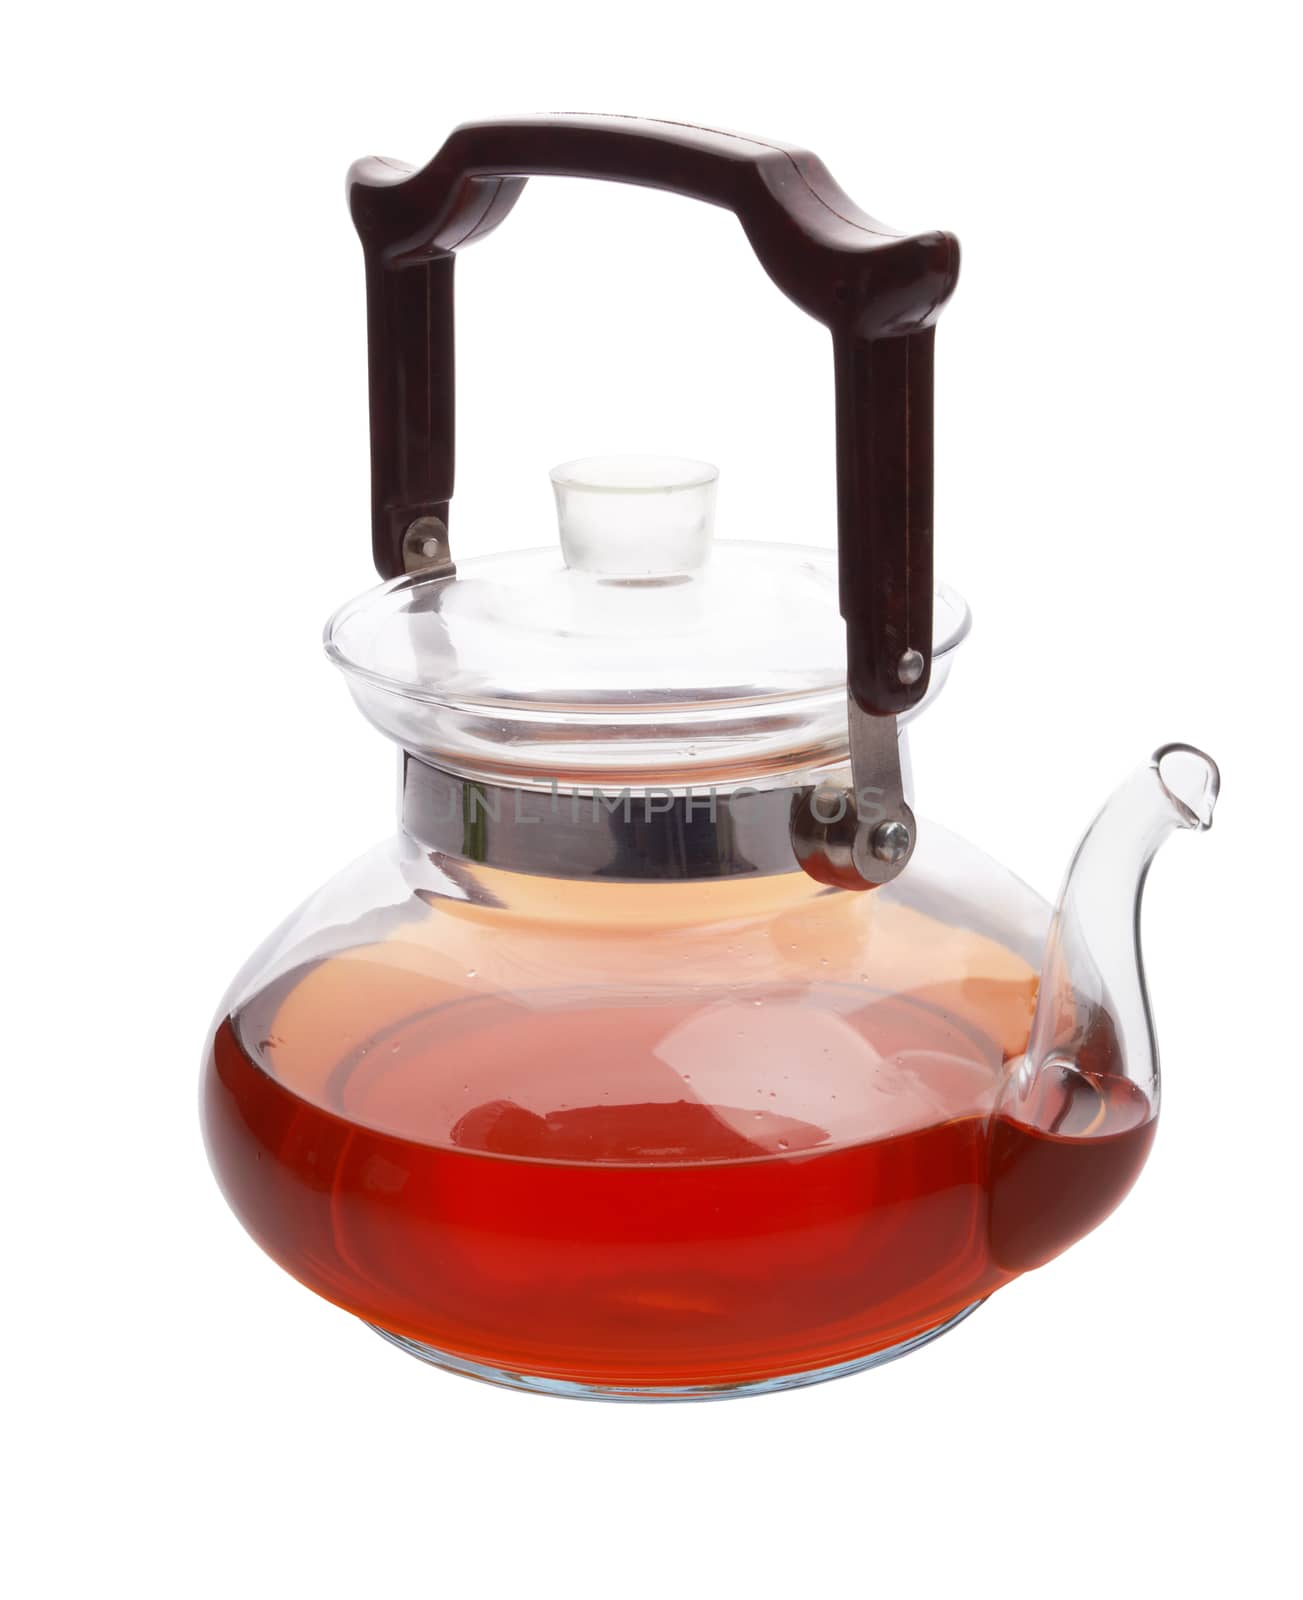 Teapot with tea isolated on a white